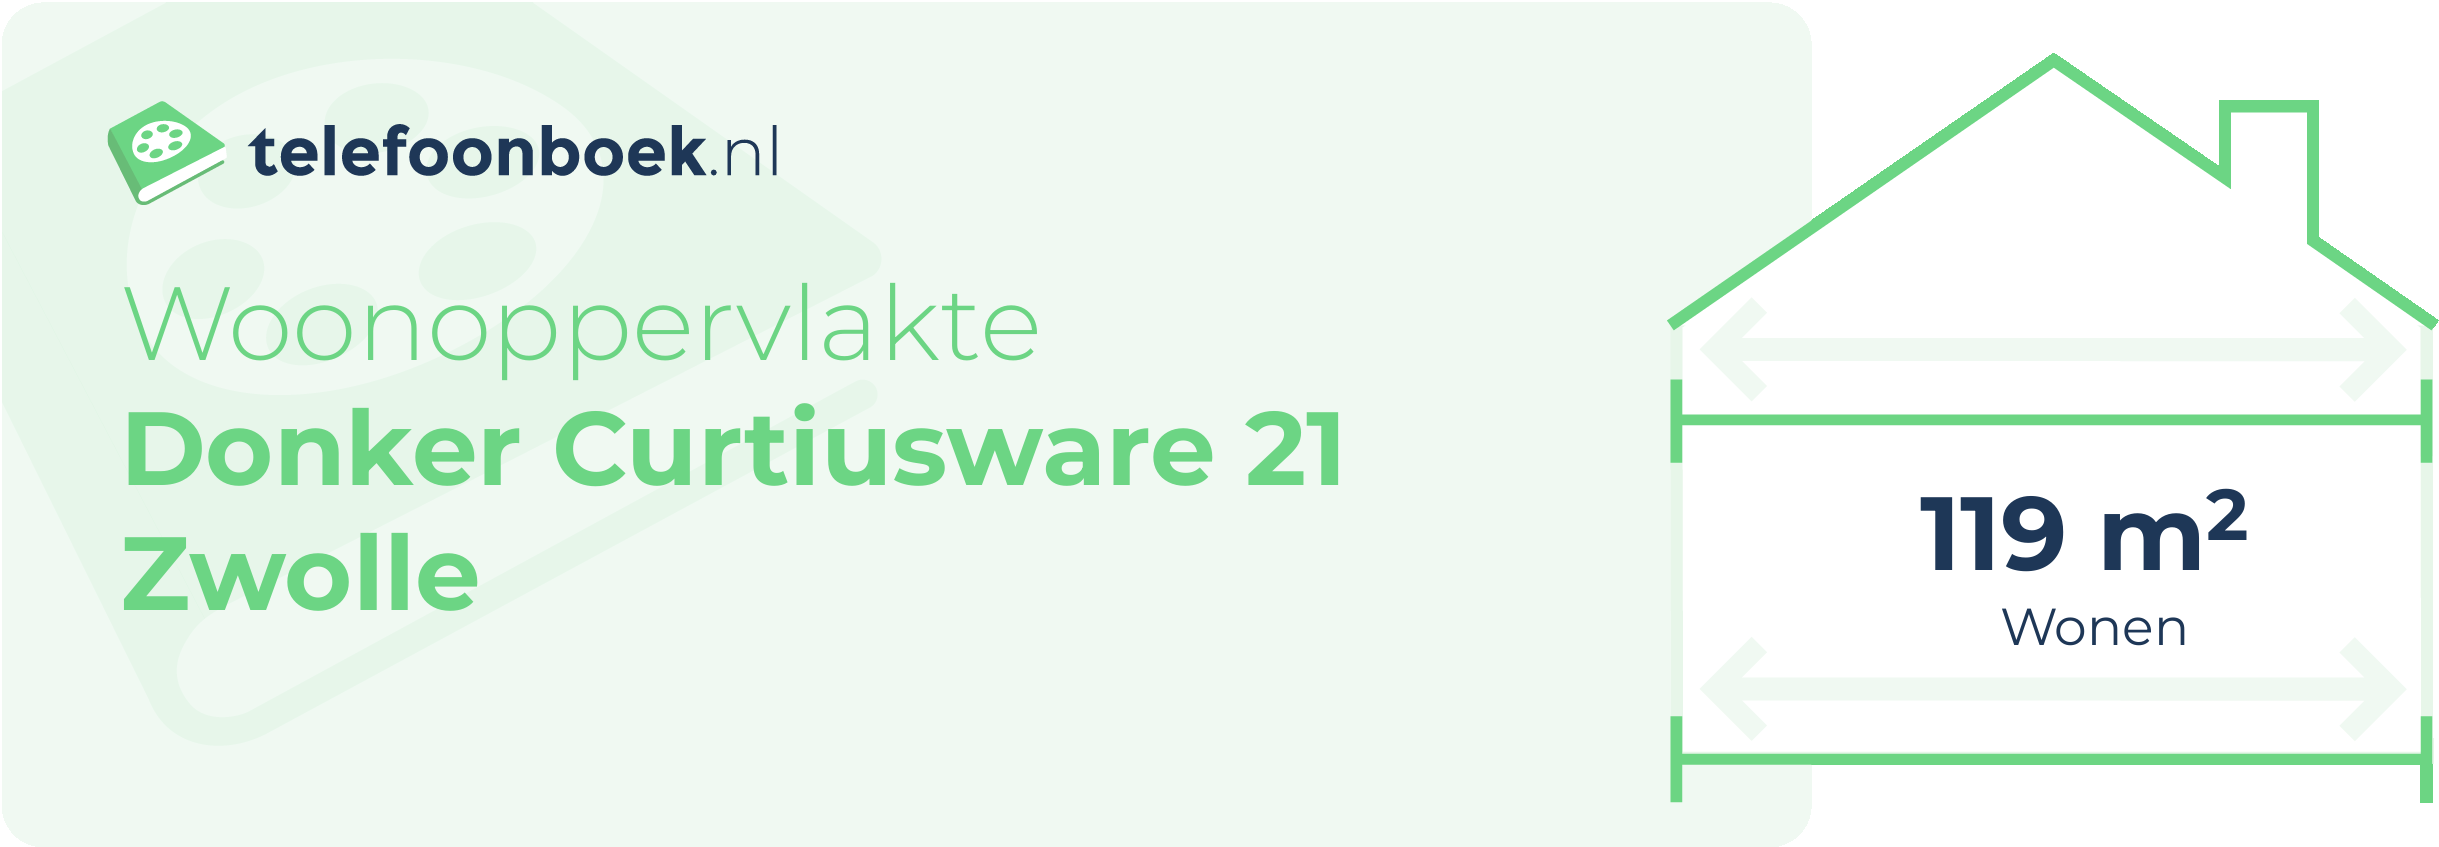 Woonoppervlakte Donker Curtiusware 21 Zwolle